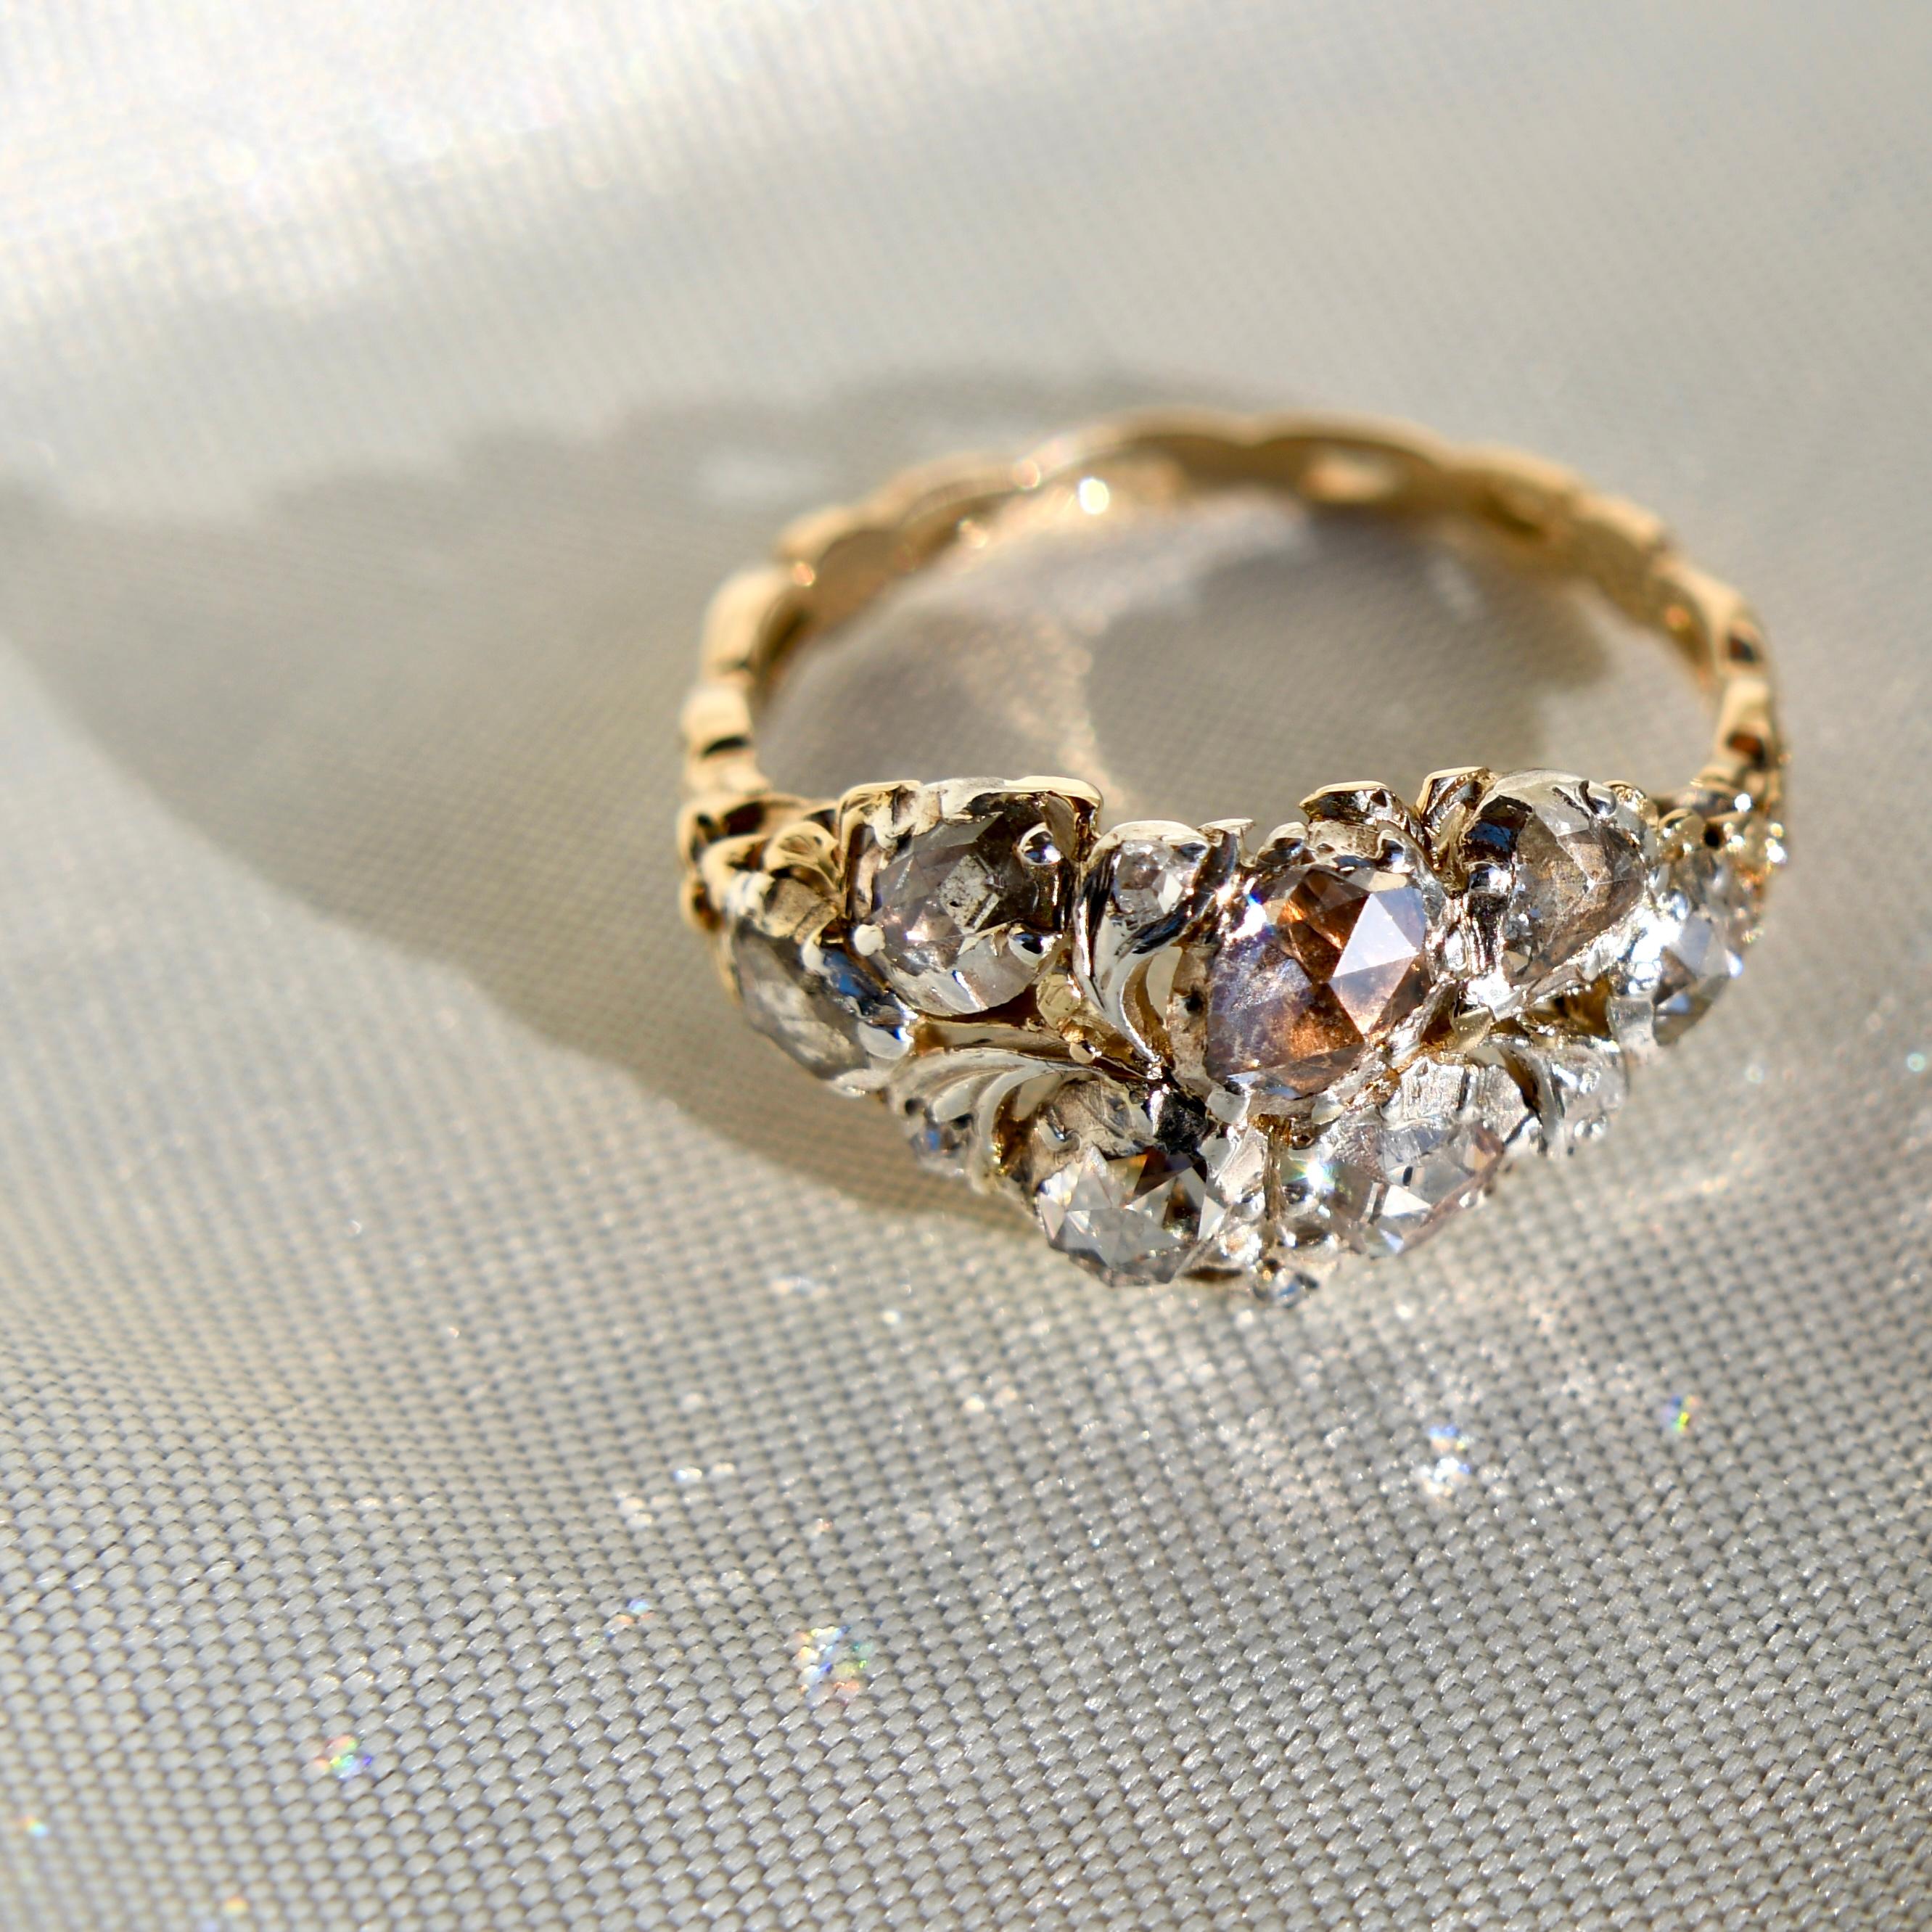 This ring was most likely made in France around 1760 and is in very good, antique condition. 

- Eleven rose cut diamonds, approx. 1.50 ct total 
- 585/ 14 ct yellow gold and silver  
- Ring size: EU 56, UK P, US 7 1/2 (Not sizeable) 
- The ring